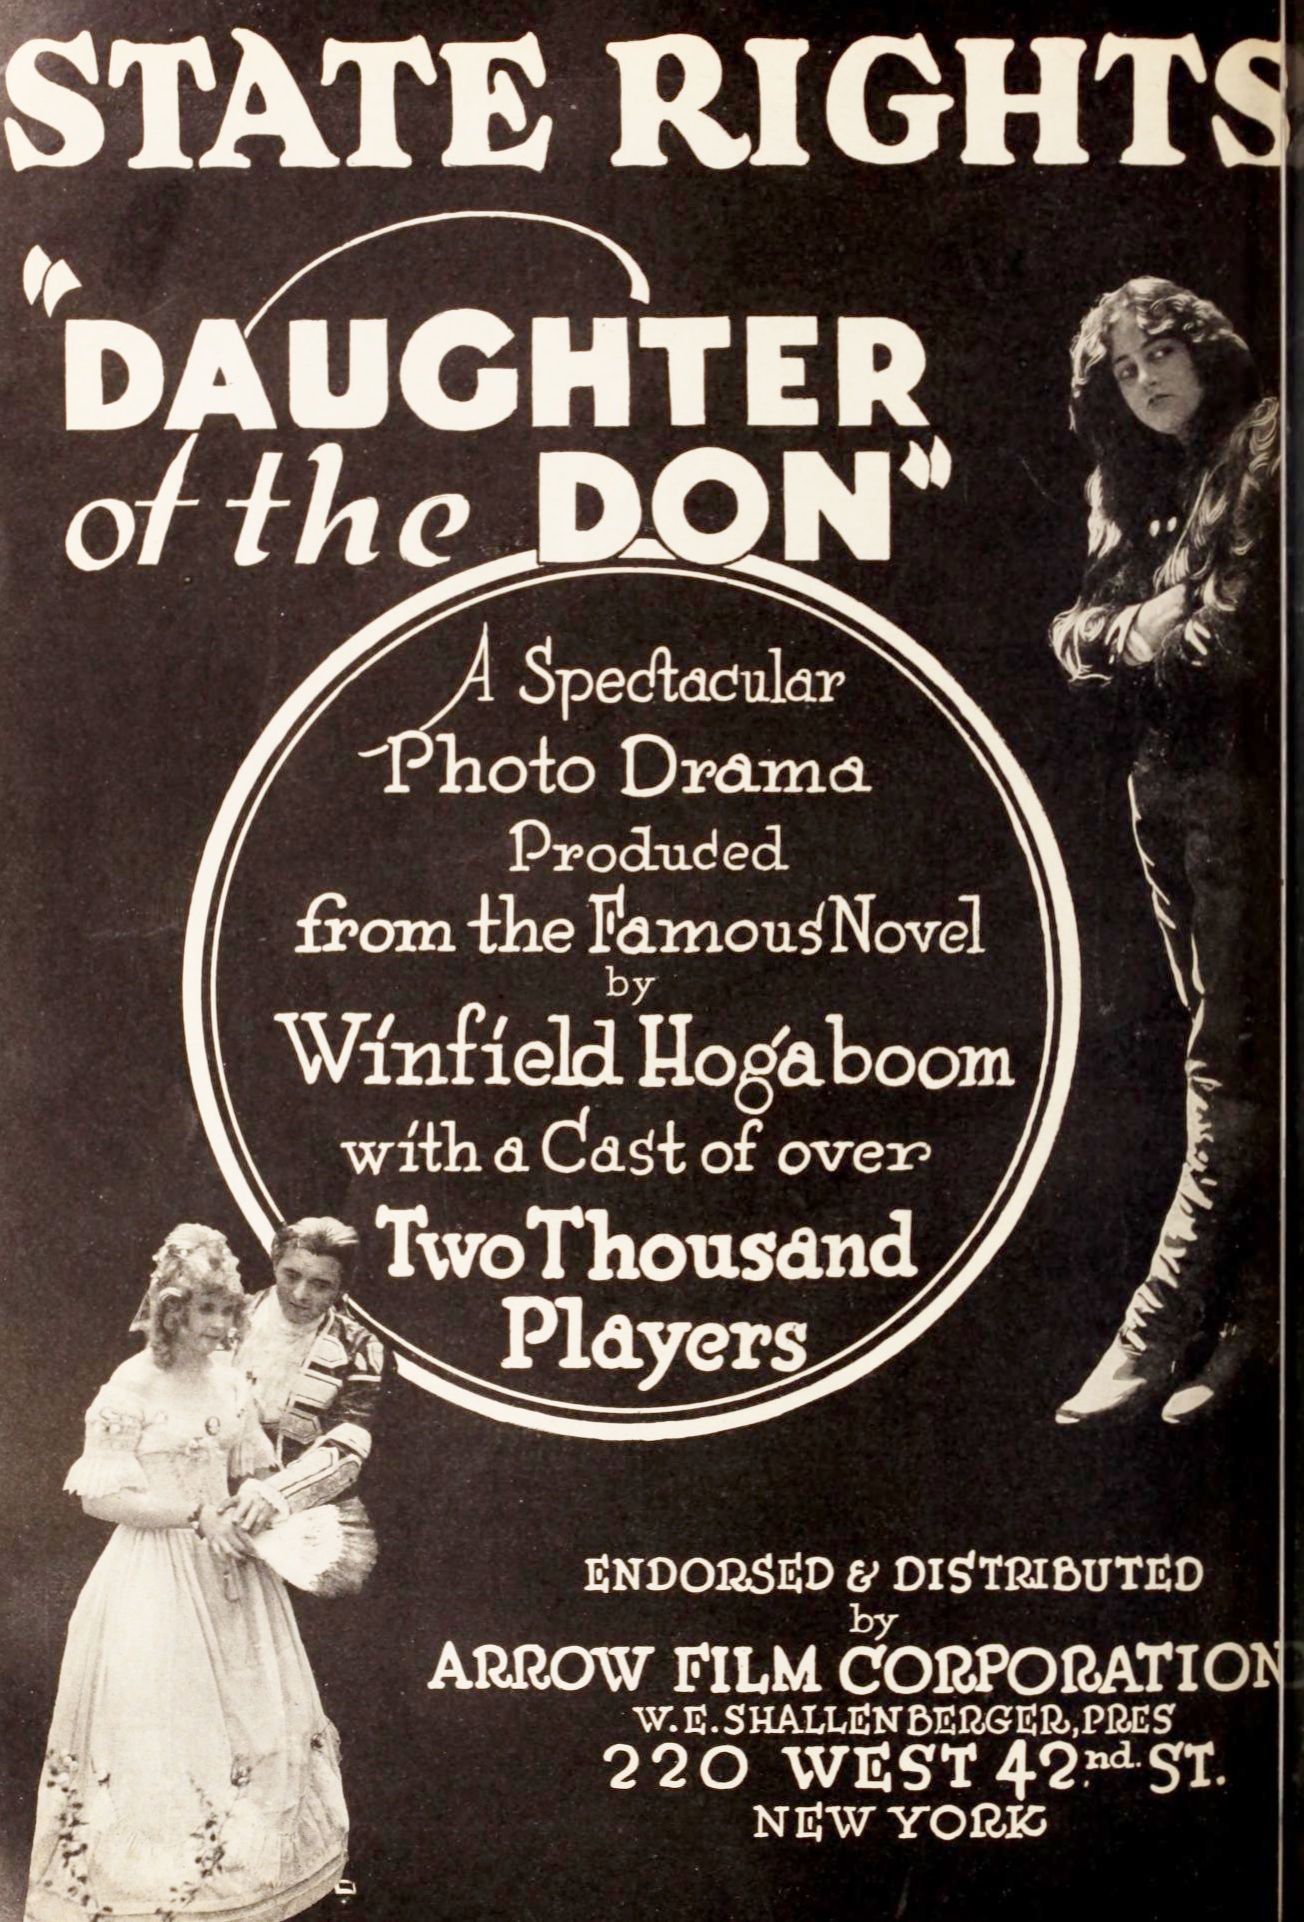 The Daughter of the Don